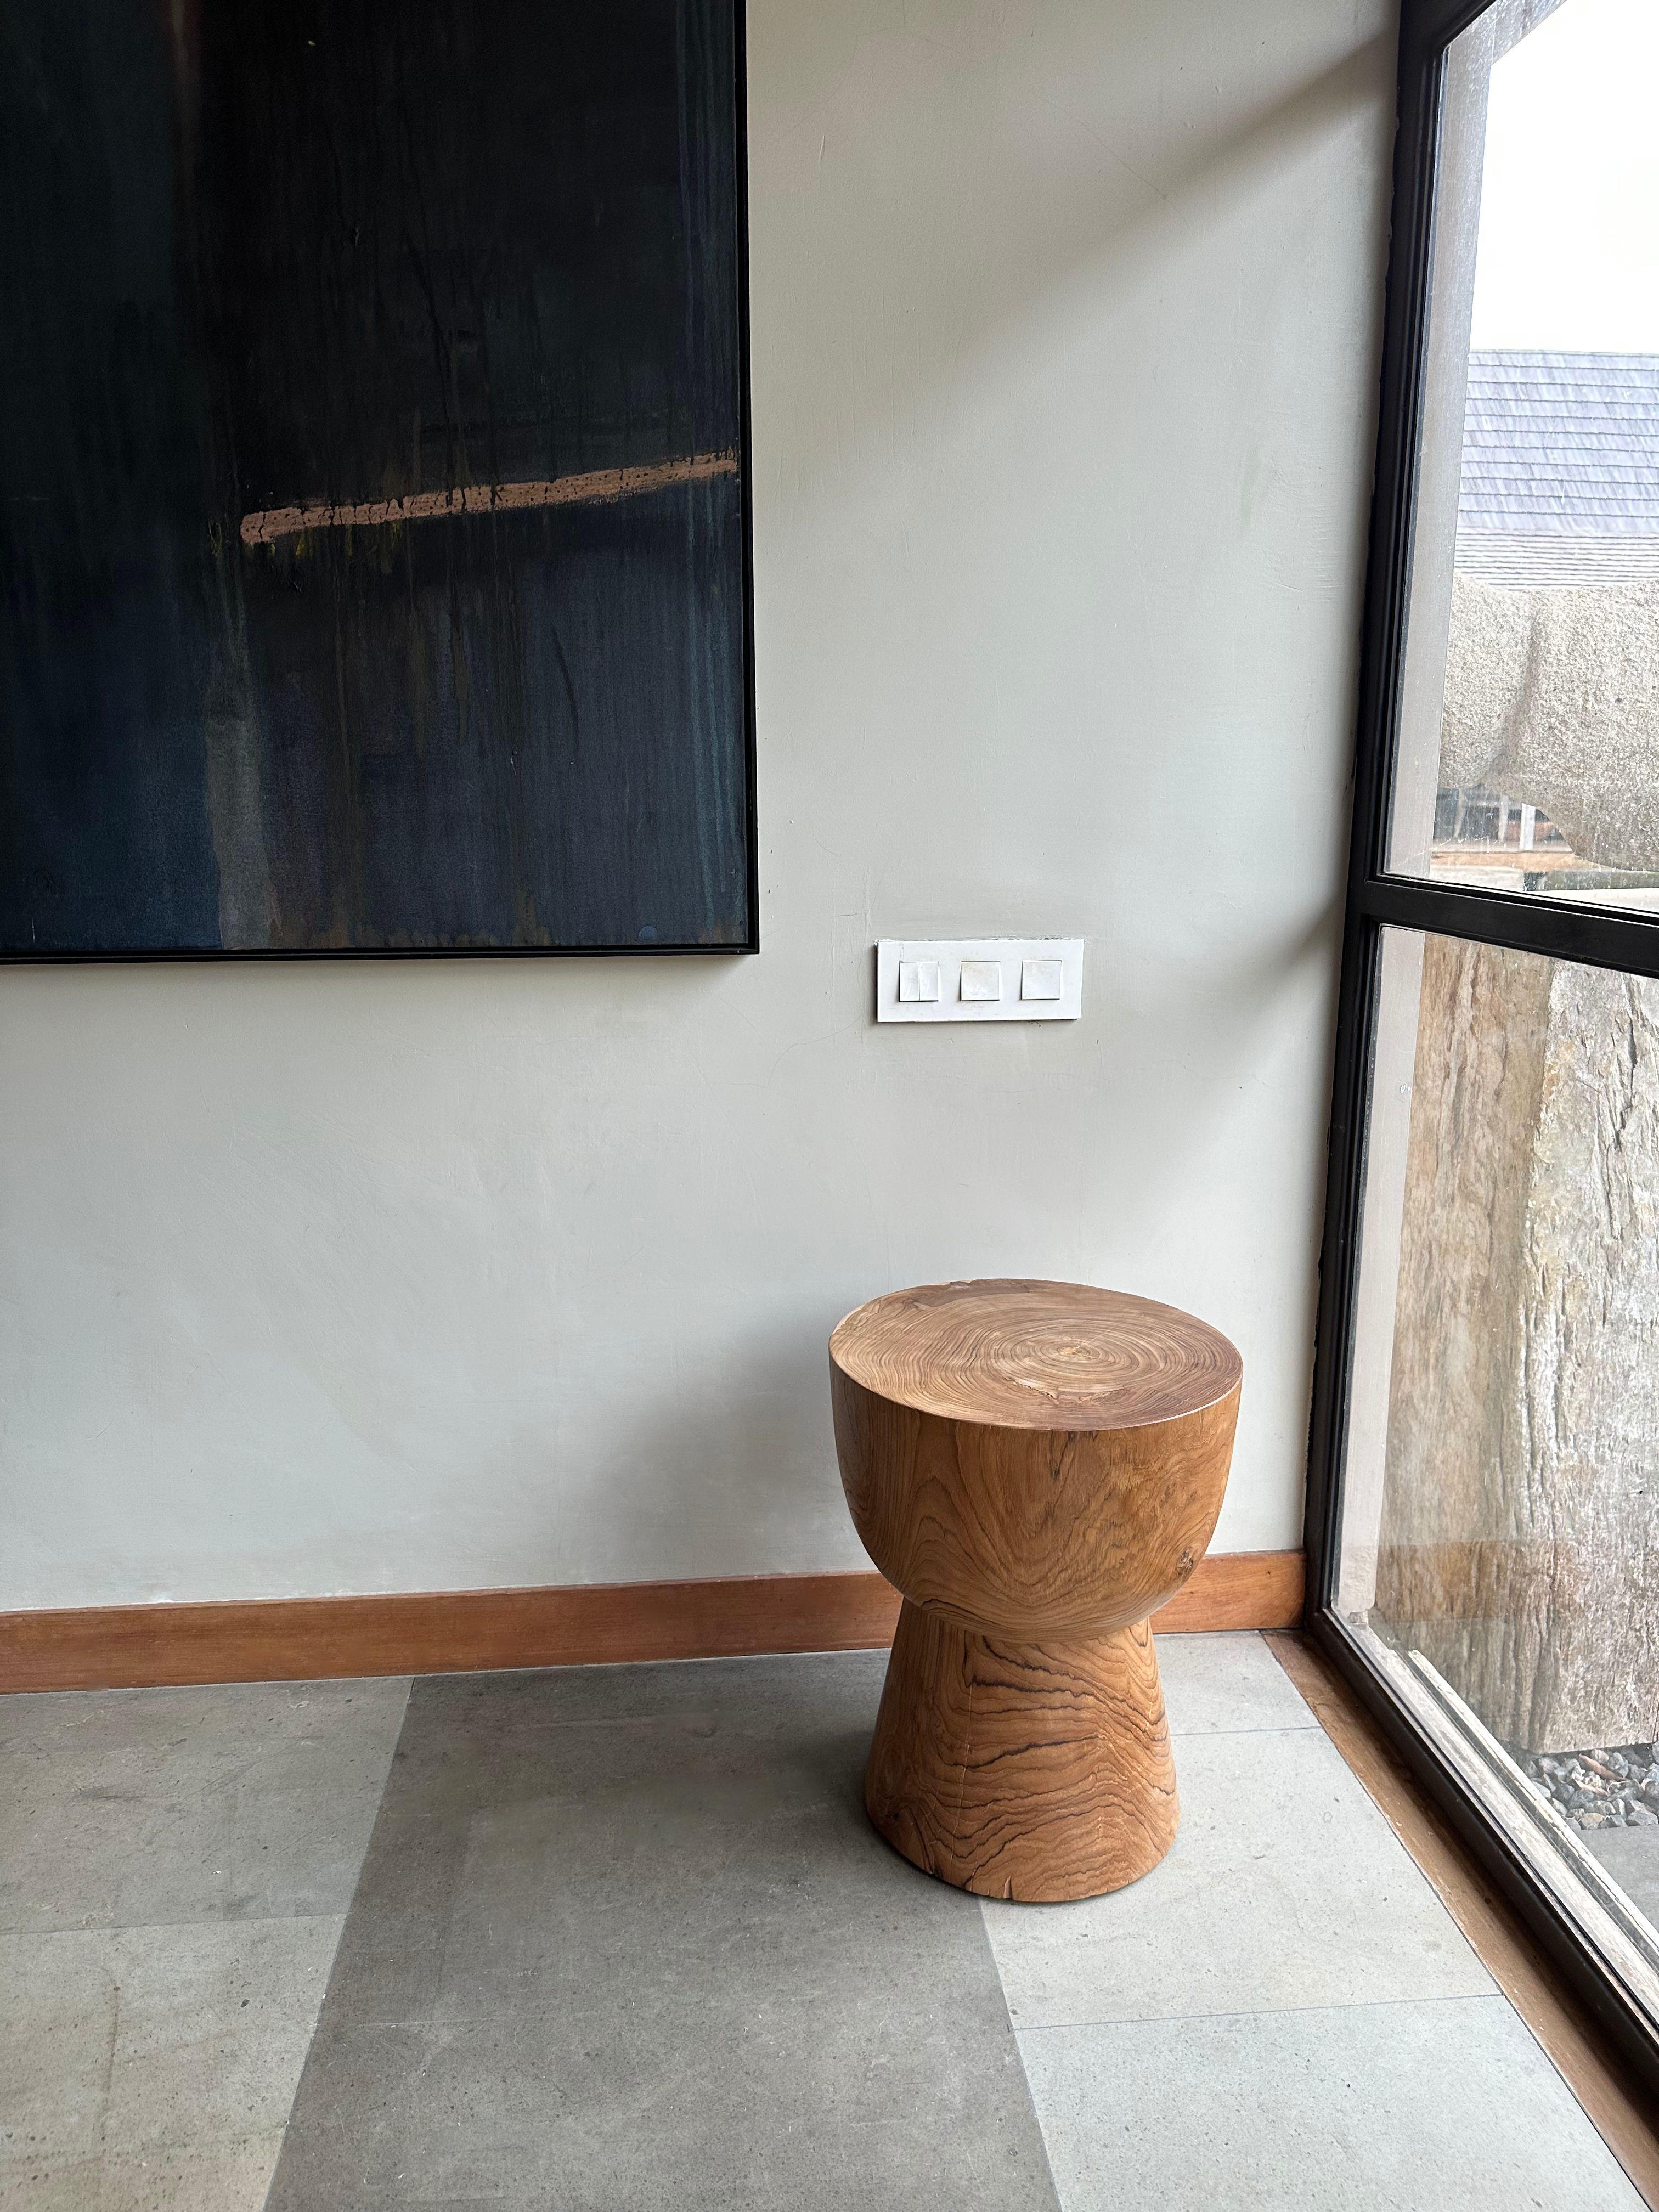 A wonderfully sculptural side table crafted from Teak Wood. Its subtly curved edges add to its charm. This table features a wonderful array of wood textures and shades. The perfect object to bring warmth to any space.